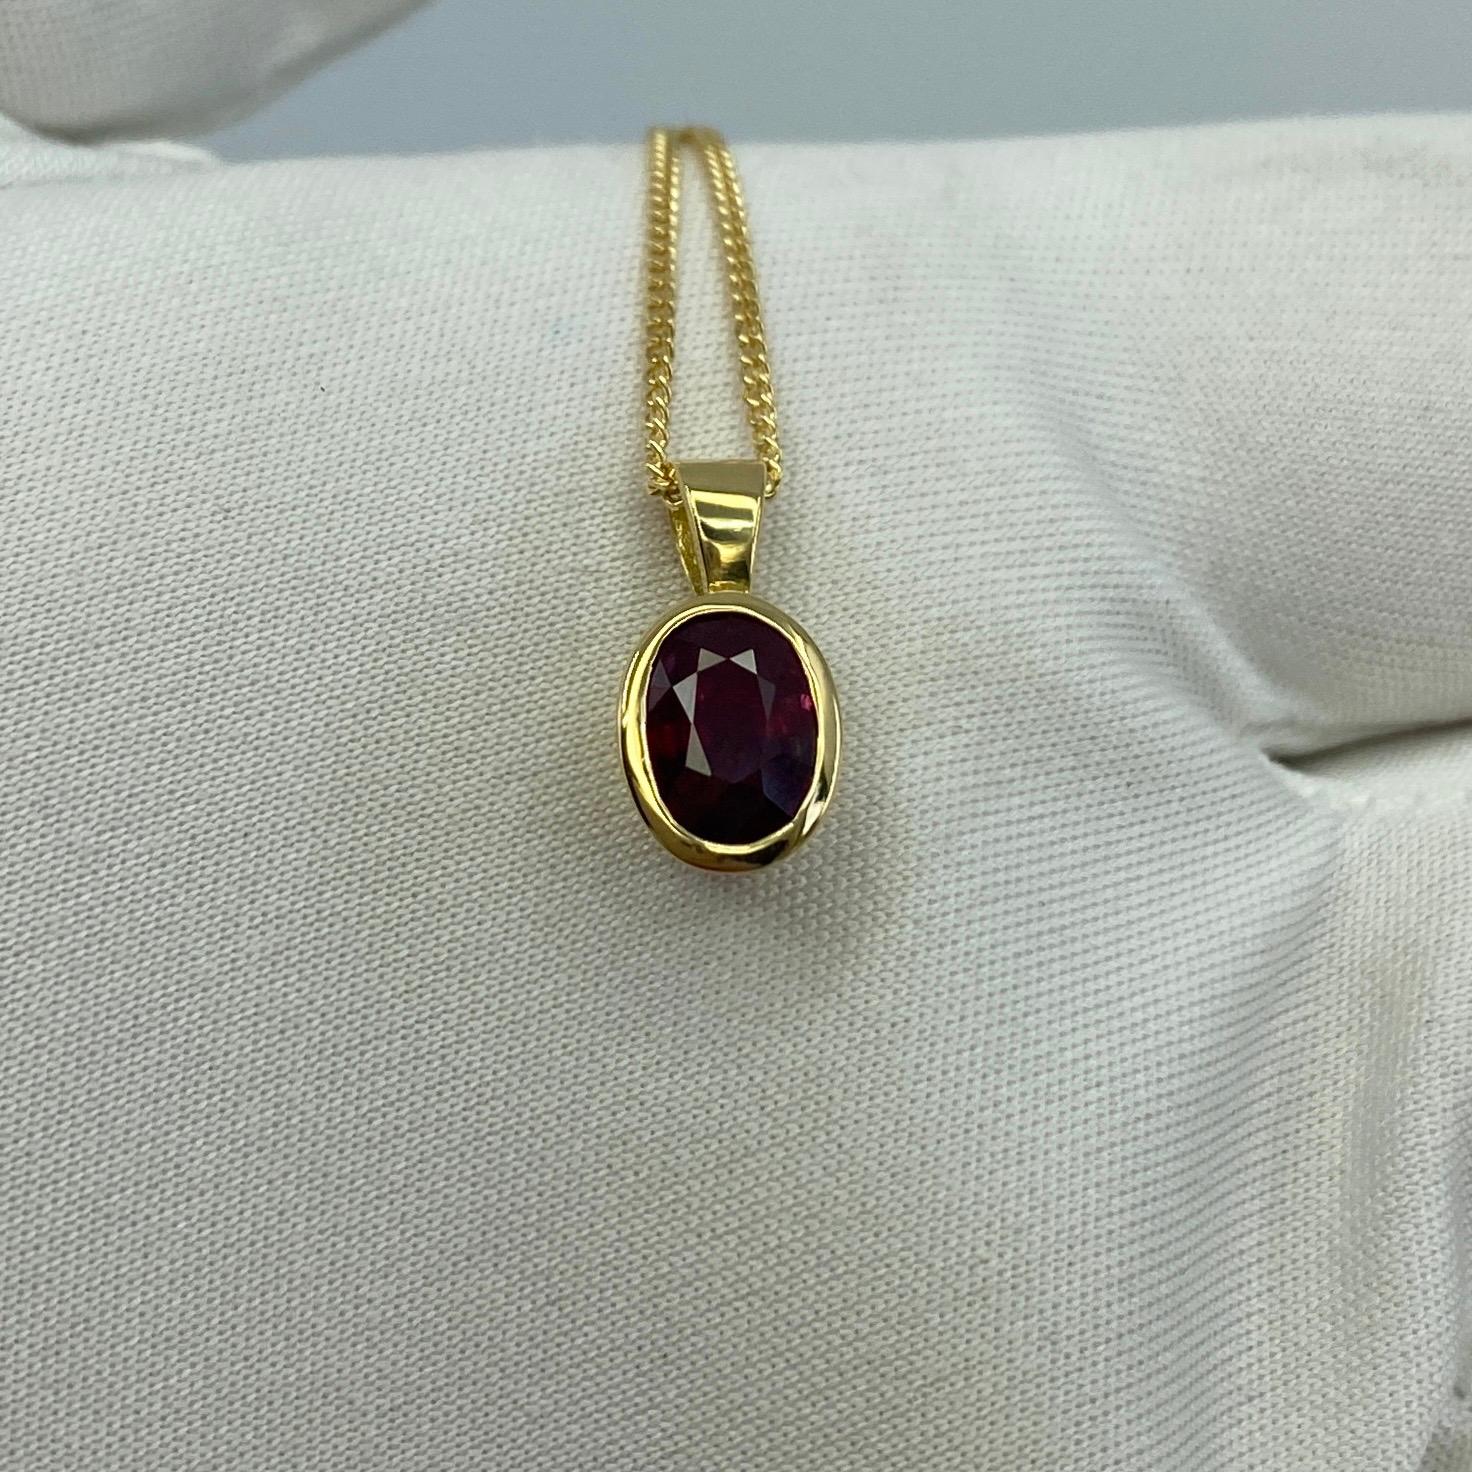 Fine Deep Red Ruby 18 Karat Yellow Gold Solitaire Pendant Necklace.

Stunning 1.17 carat ruby with a fine deep red colour and excellent oval cut. Also has very good clarity with only some small natural inclusions visible when looking closely. 

The